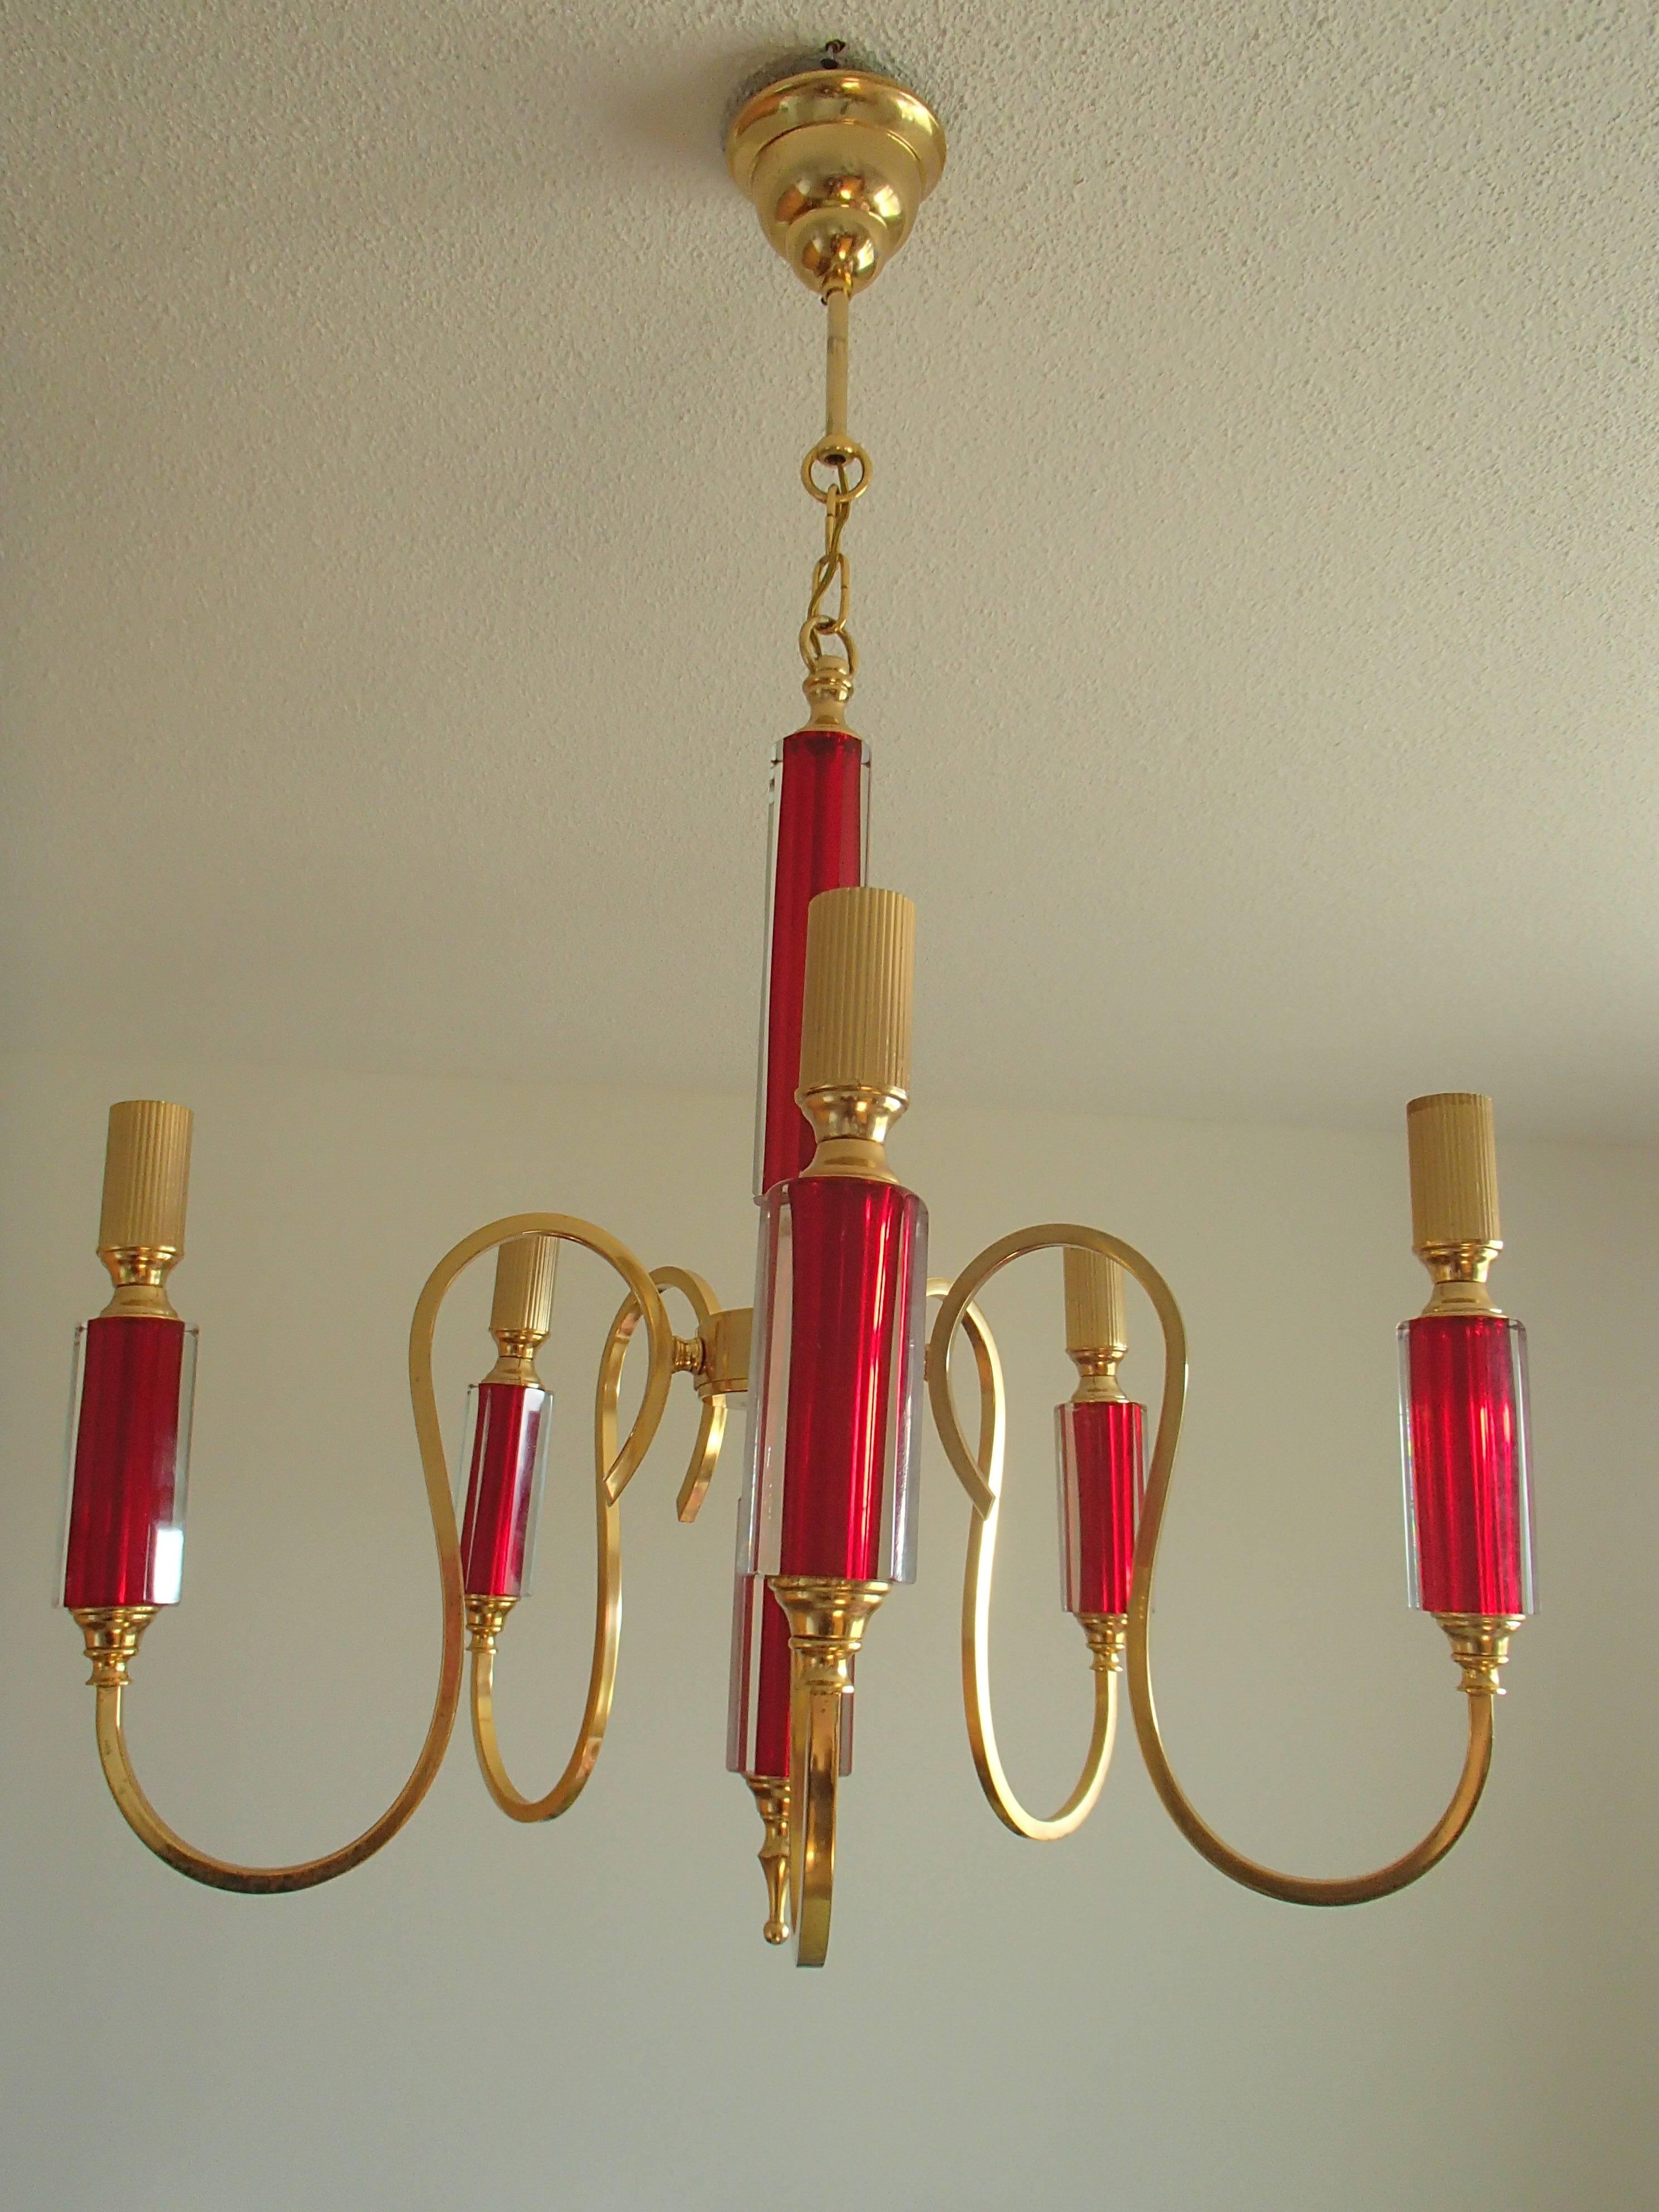 Czech Midcentury Five Arms Chandelier Vibrant Red Bohemian Glass and Brass-Plated For Sale